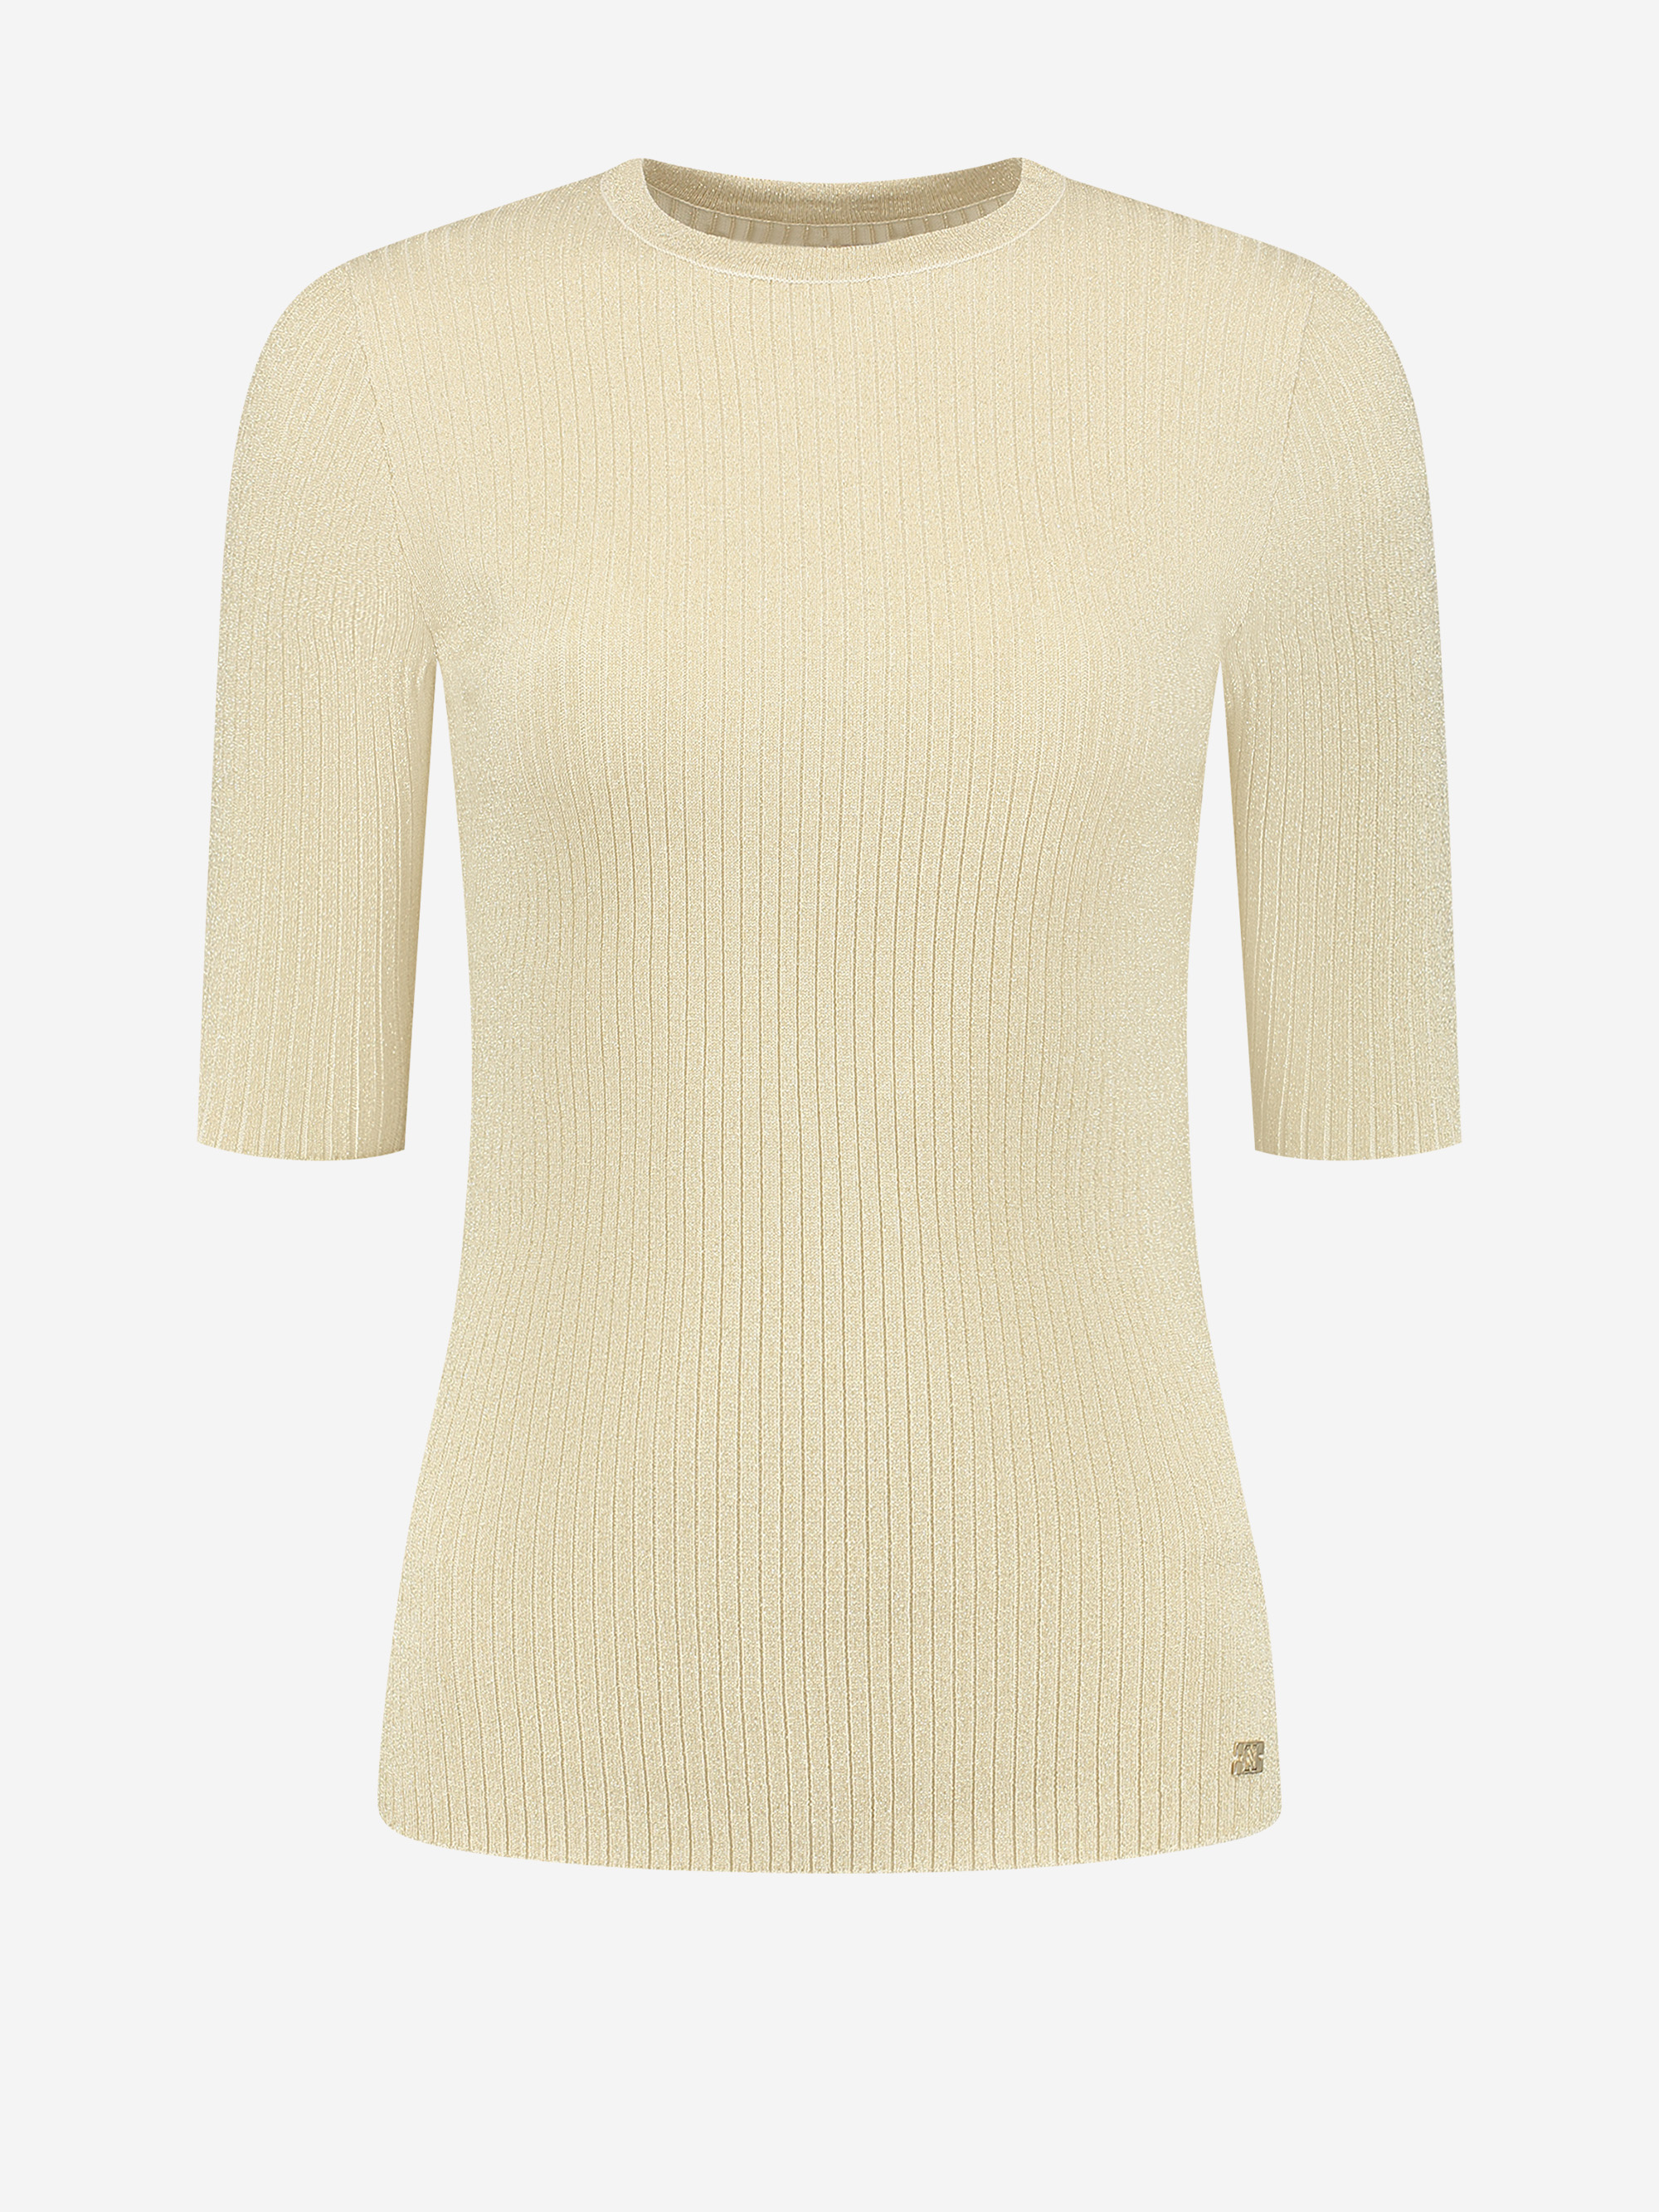 Ribbed top with half sleeves